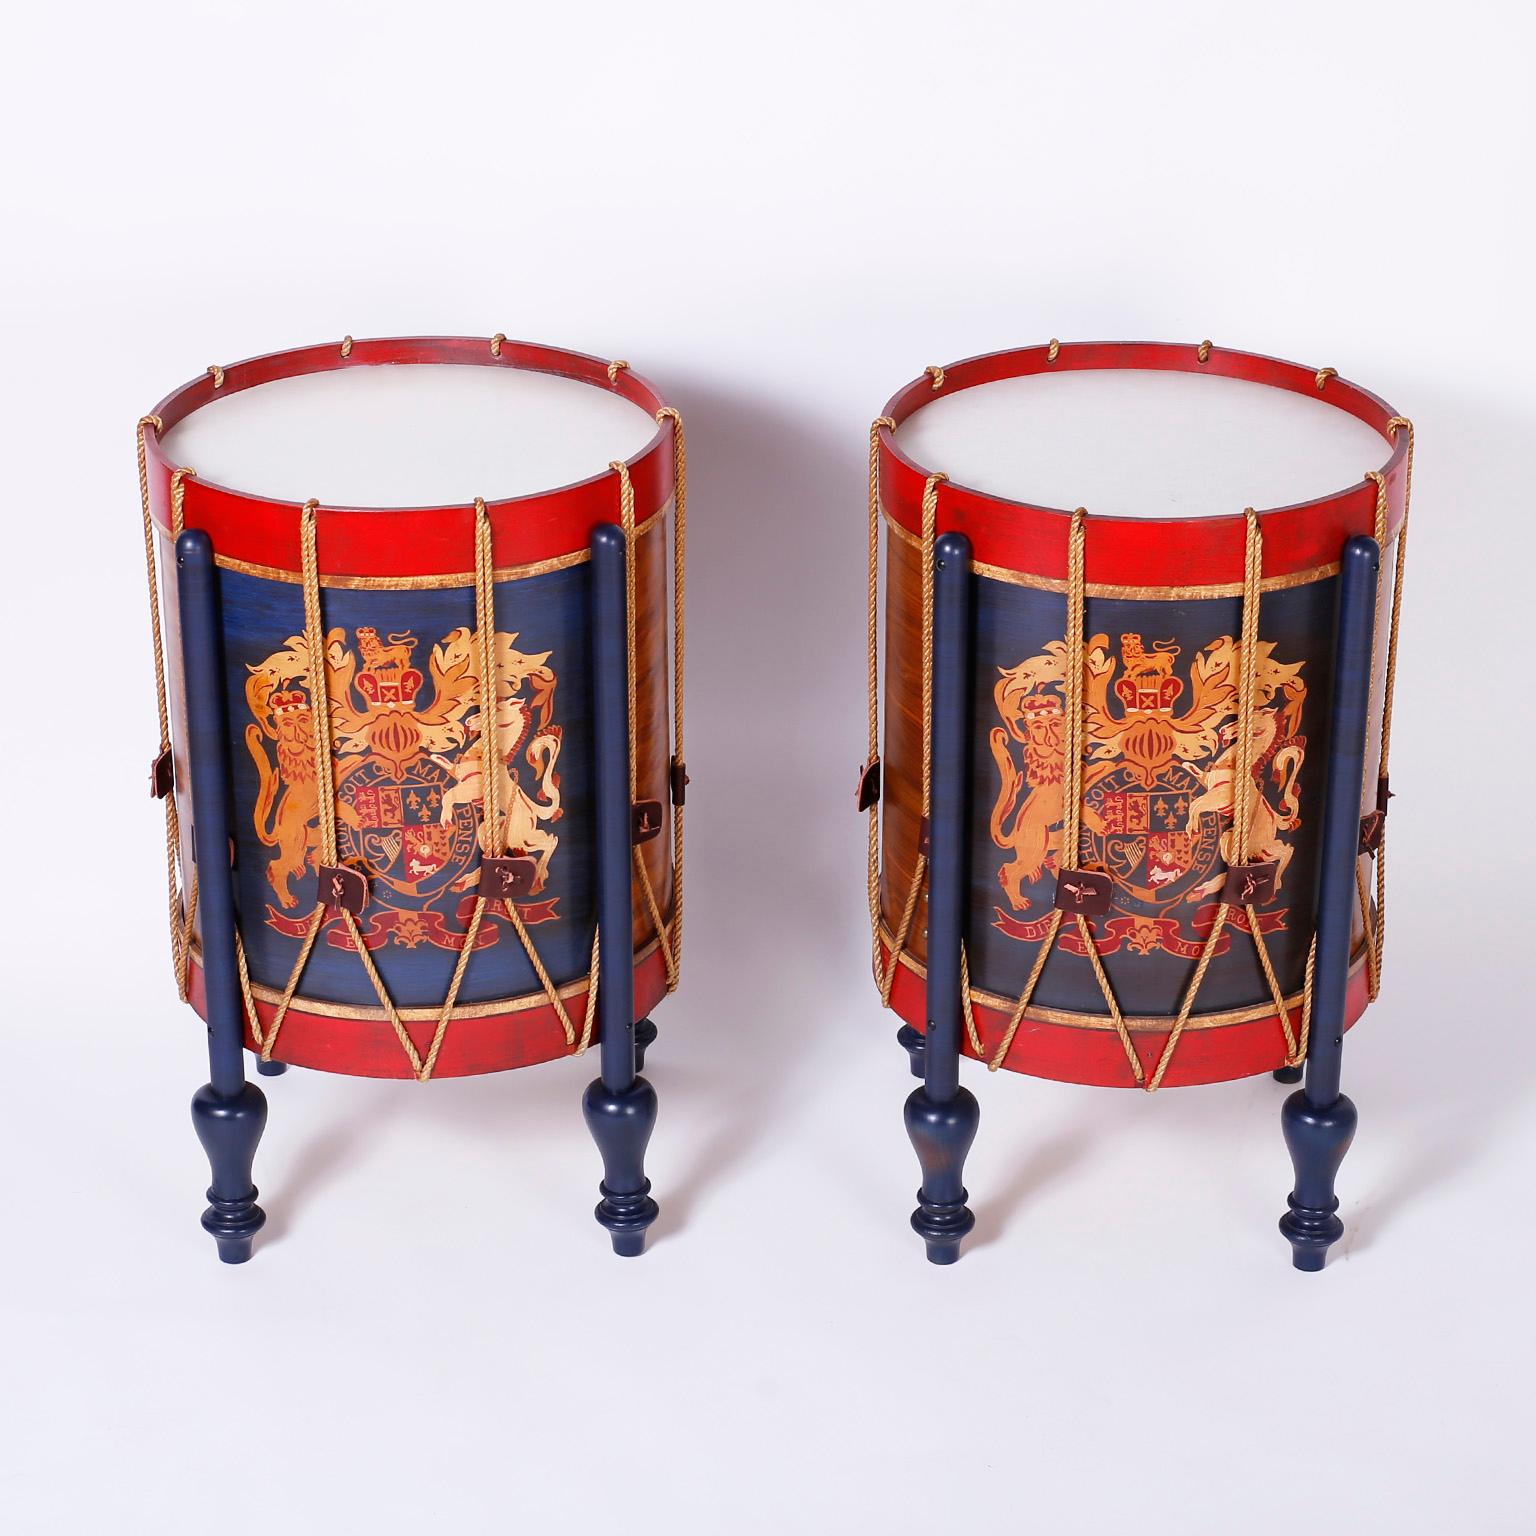 Pair of realistic faux drum stands crafted in wood and rope raised on drum stick legs and turned feet. Painted with historical accuracy depicting the crest of James I 1603, uniting the English lion with the Irish harp and the French fleur-de-lis.